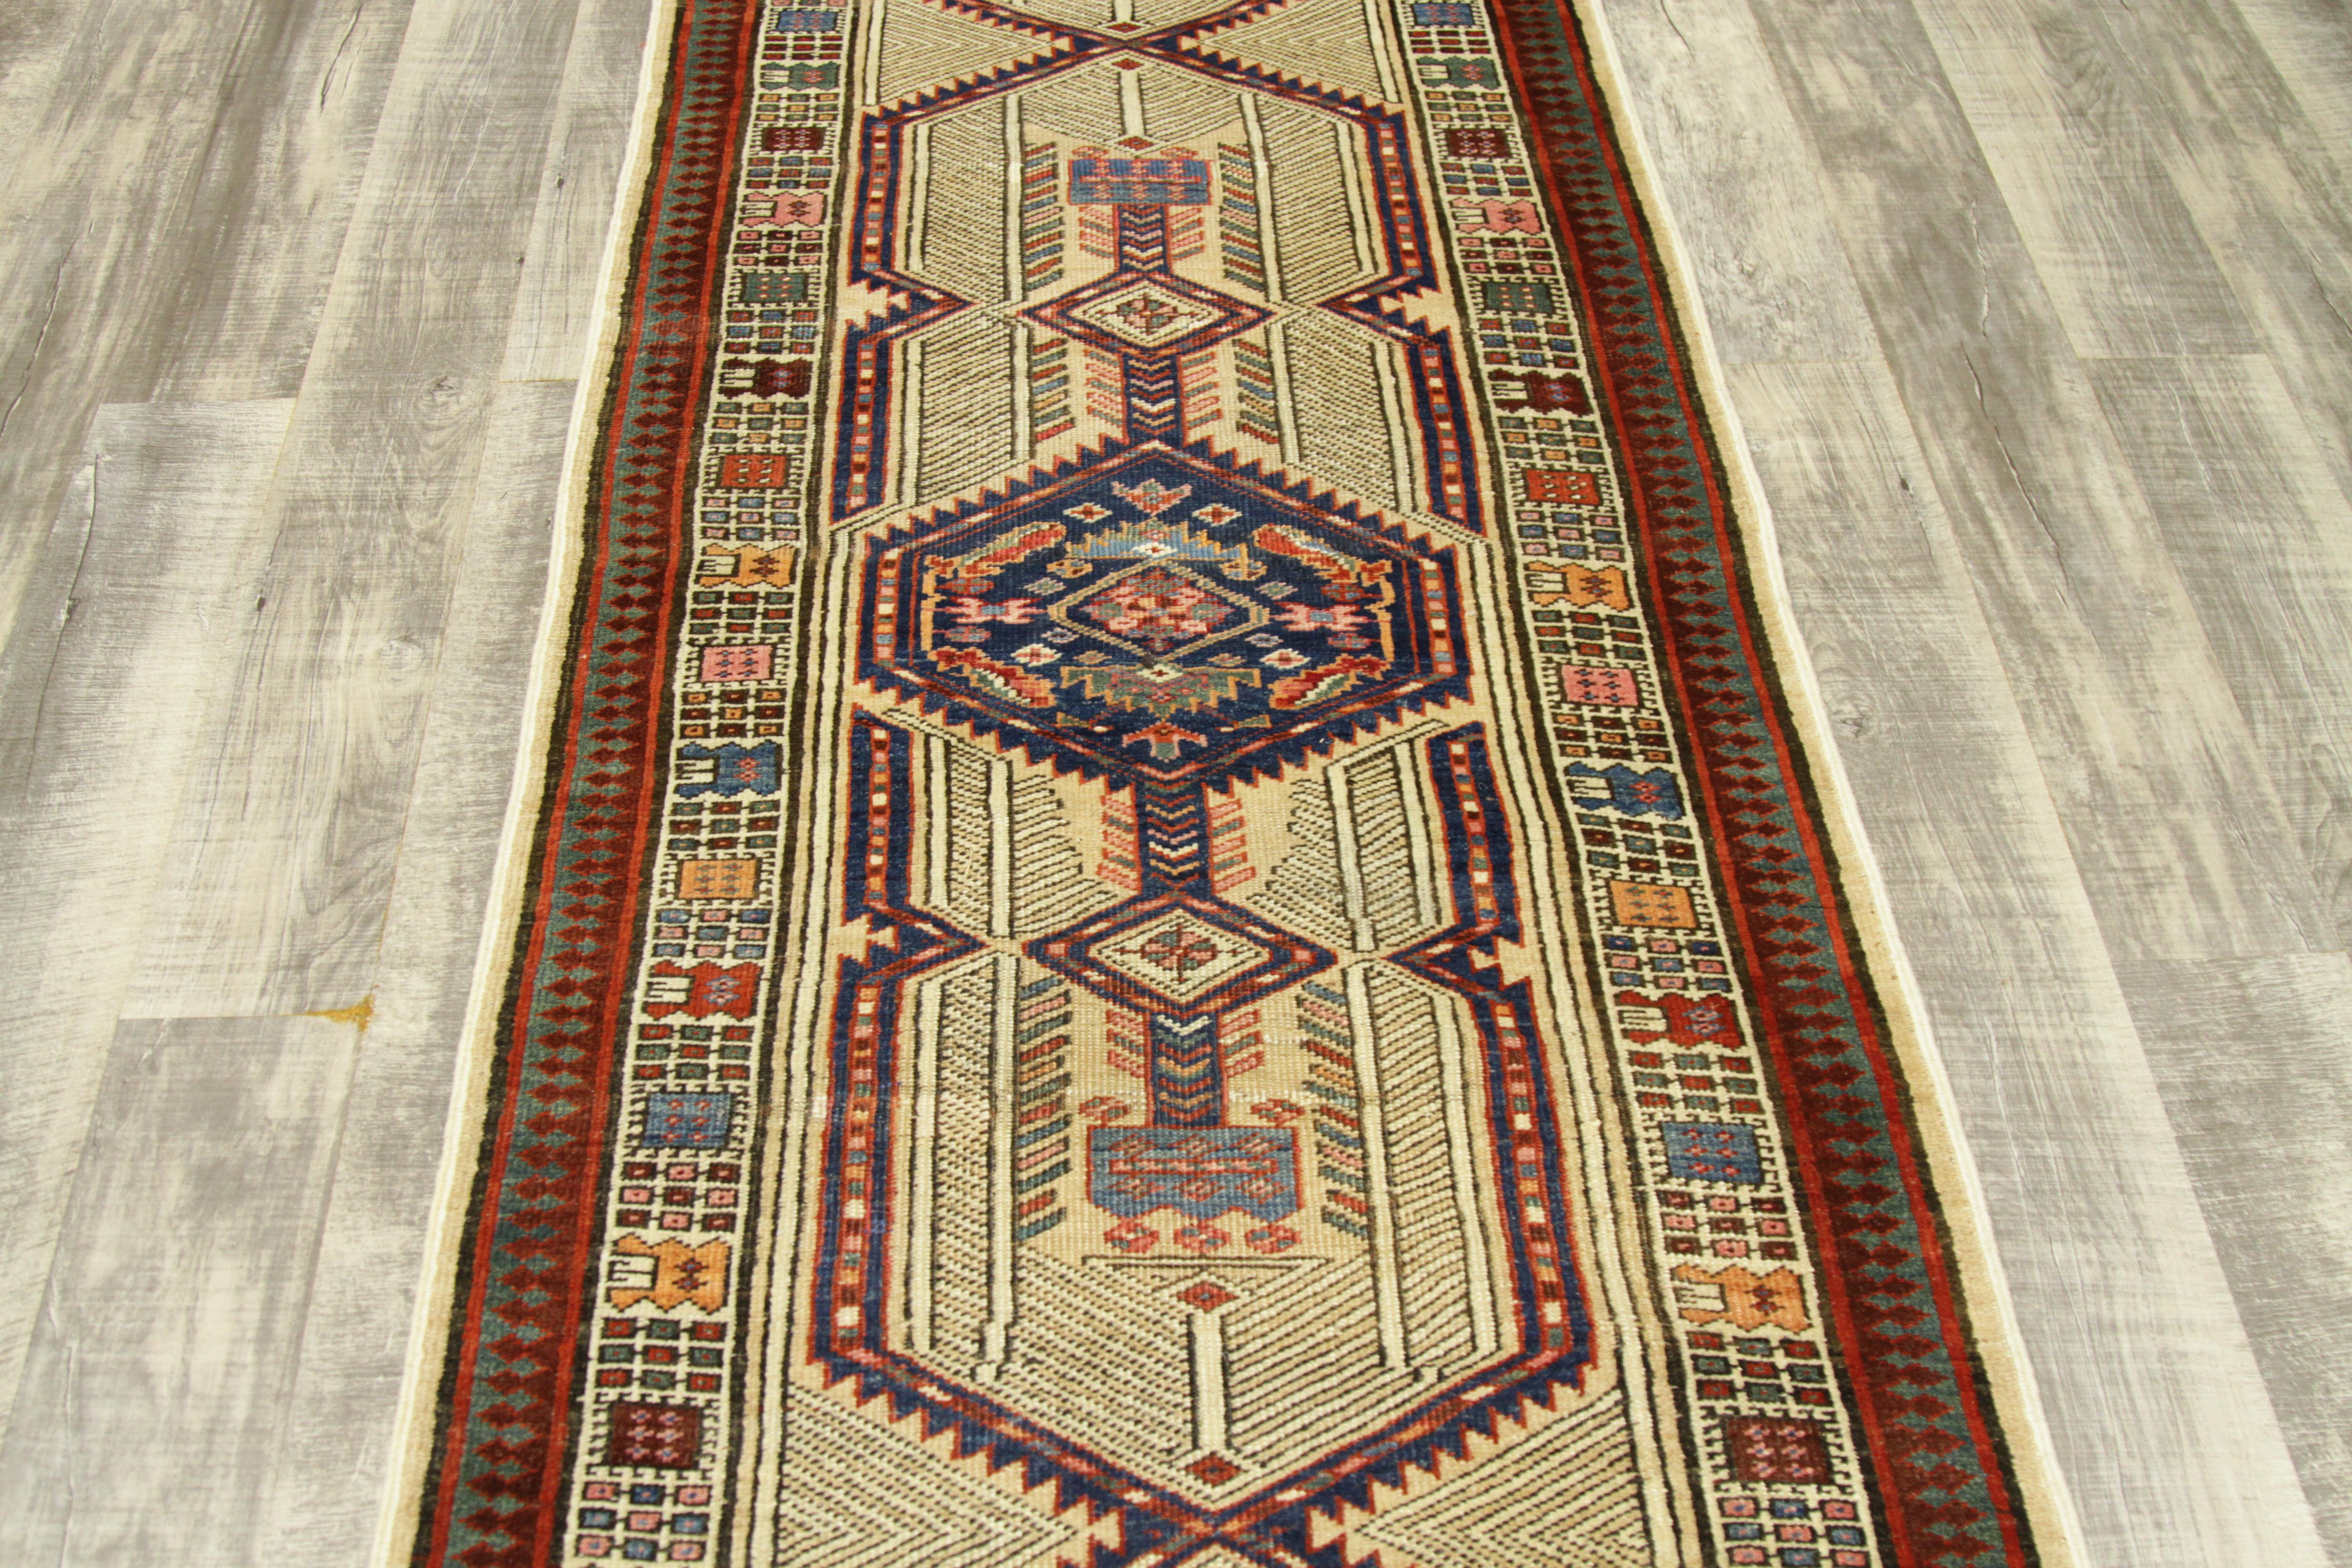 Antique Persian Rug in Tribal Sarab Design with Fine Wool Backing, circa 1930s For Sale 6